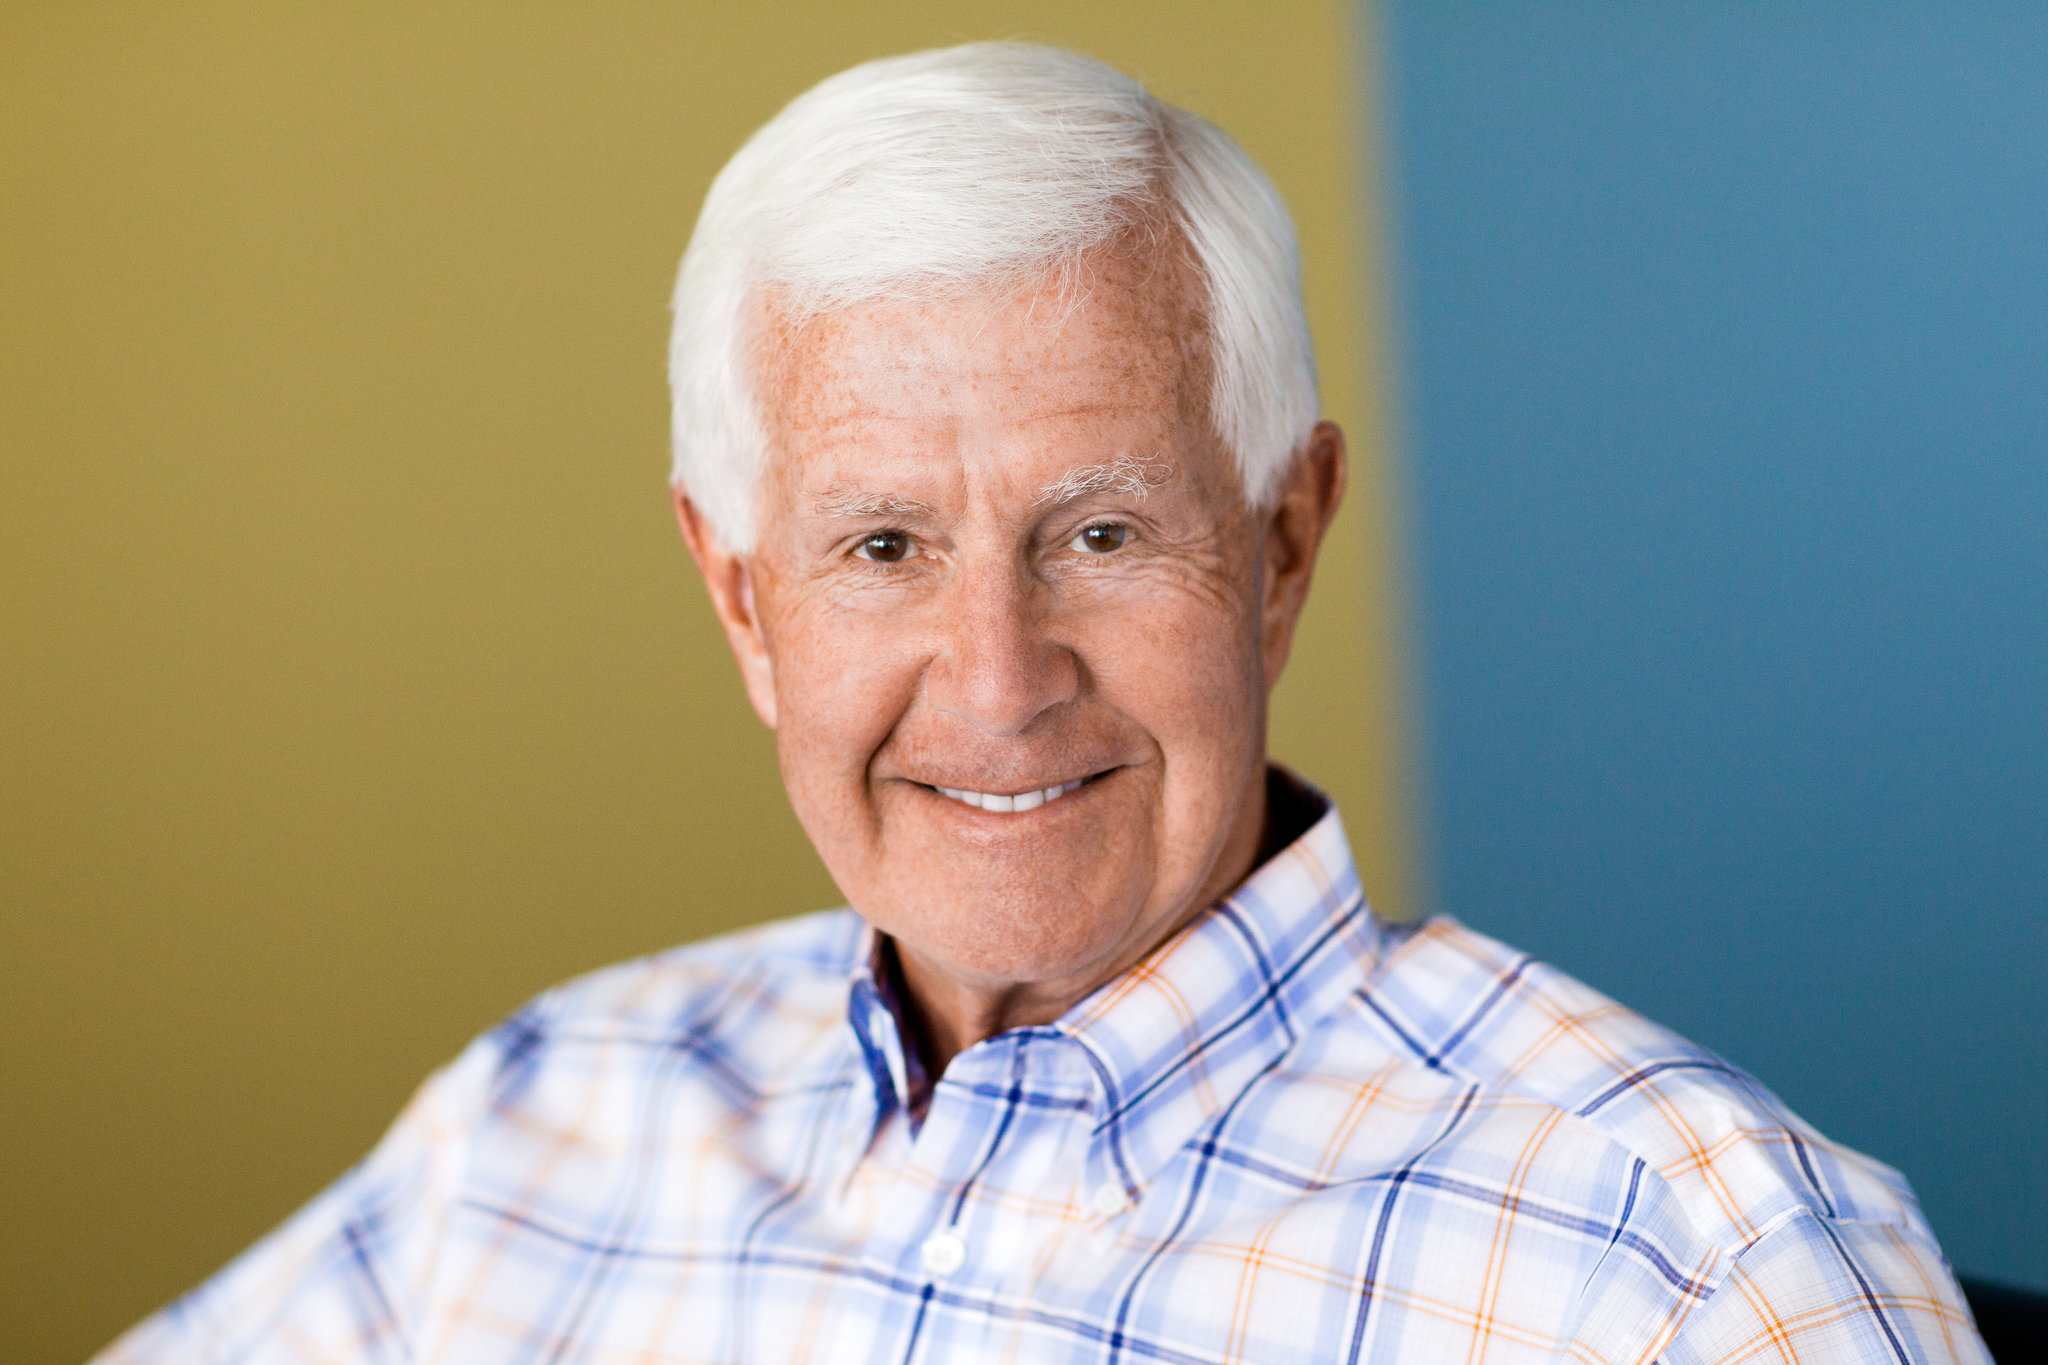 David Duffield Biography: Success Story of Workday Co-founder